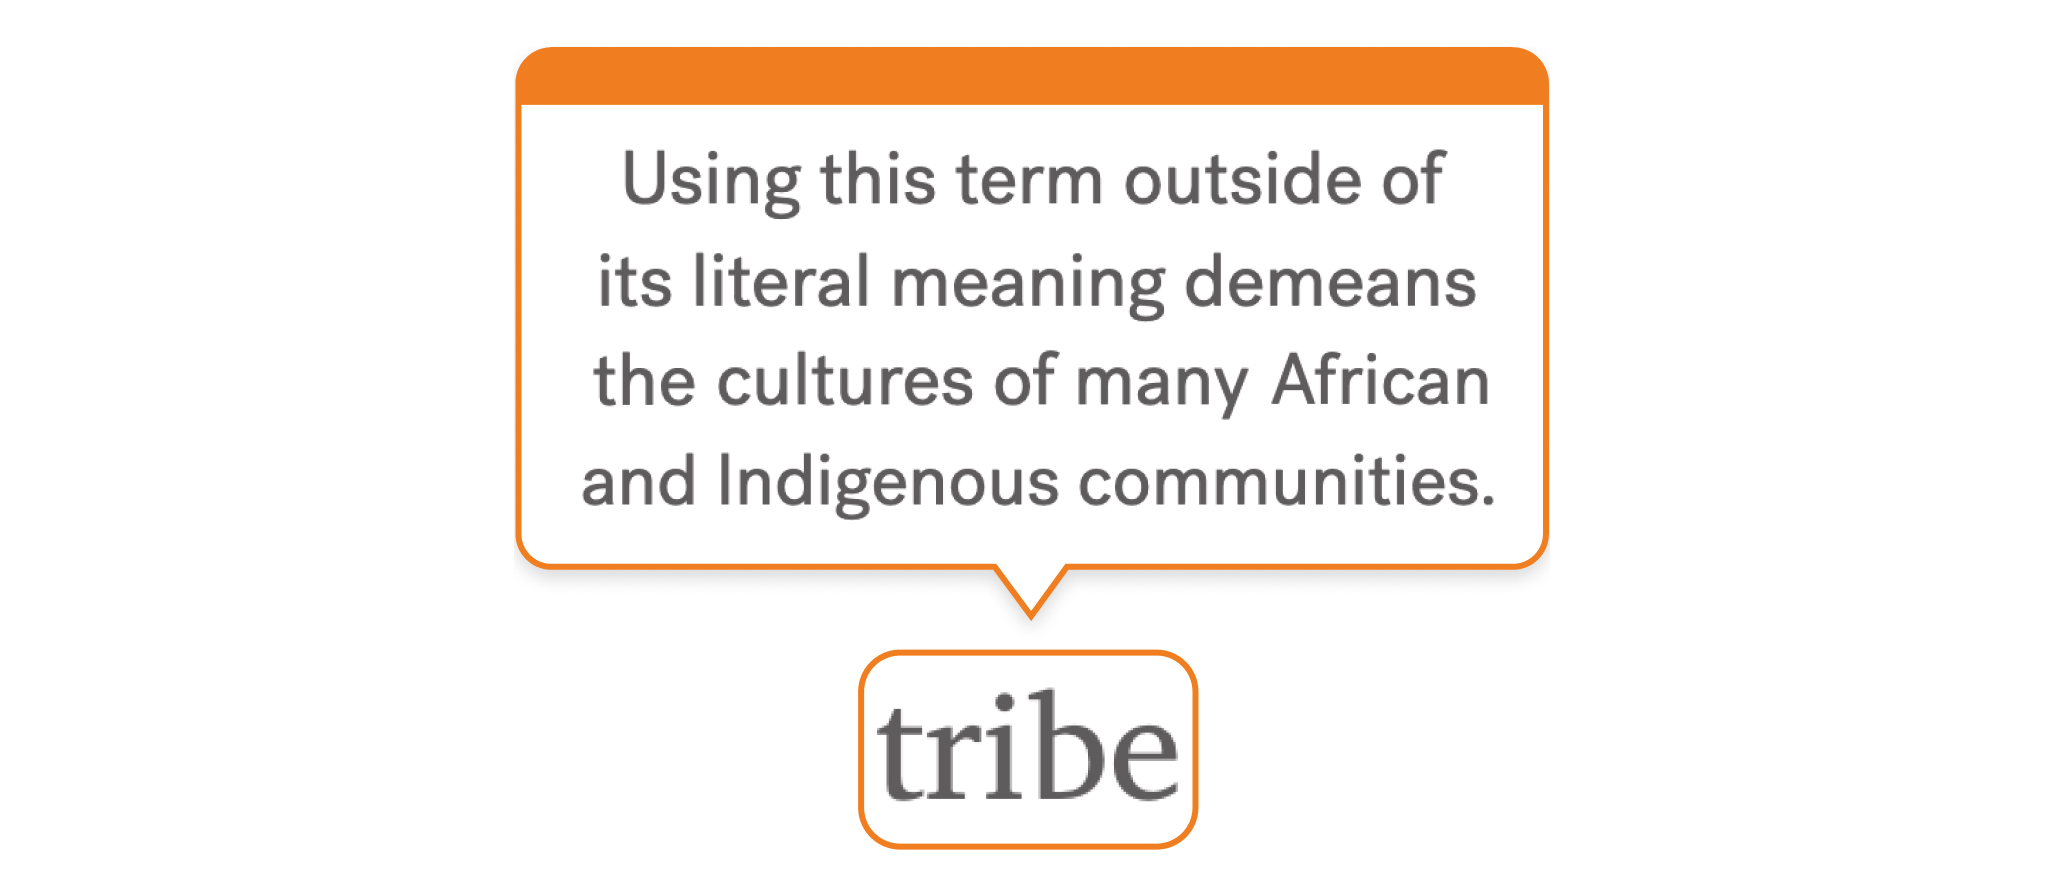 Language guidance in Textio around using the term "tribe"